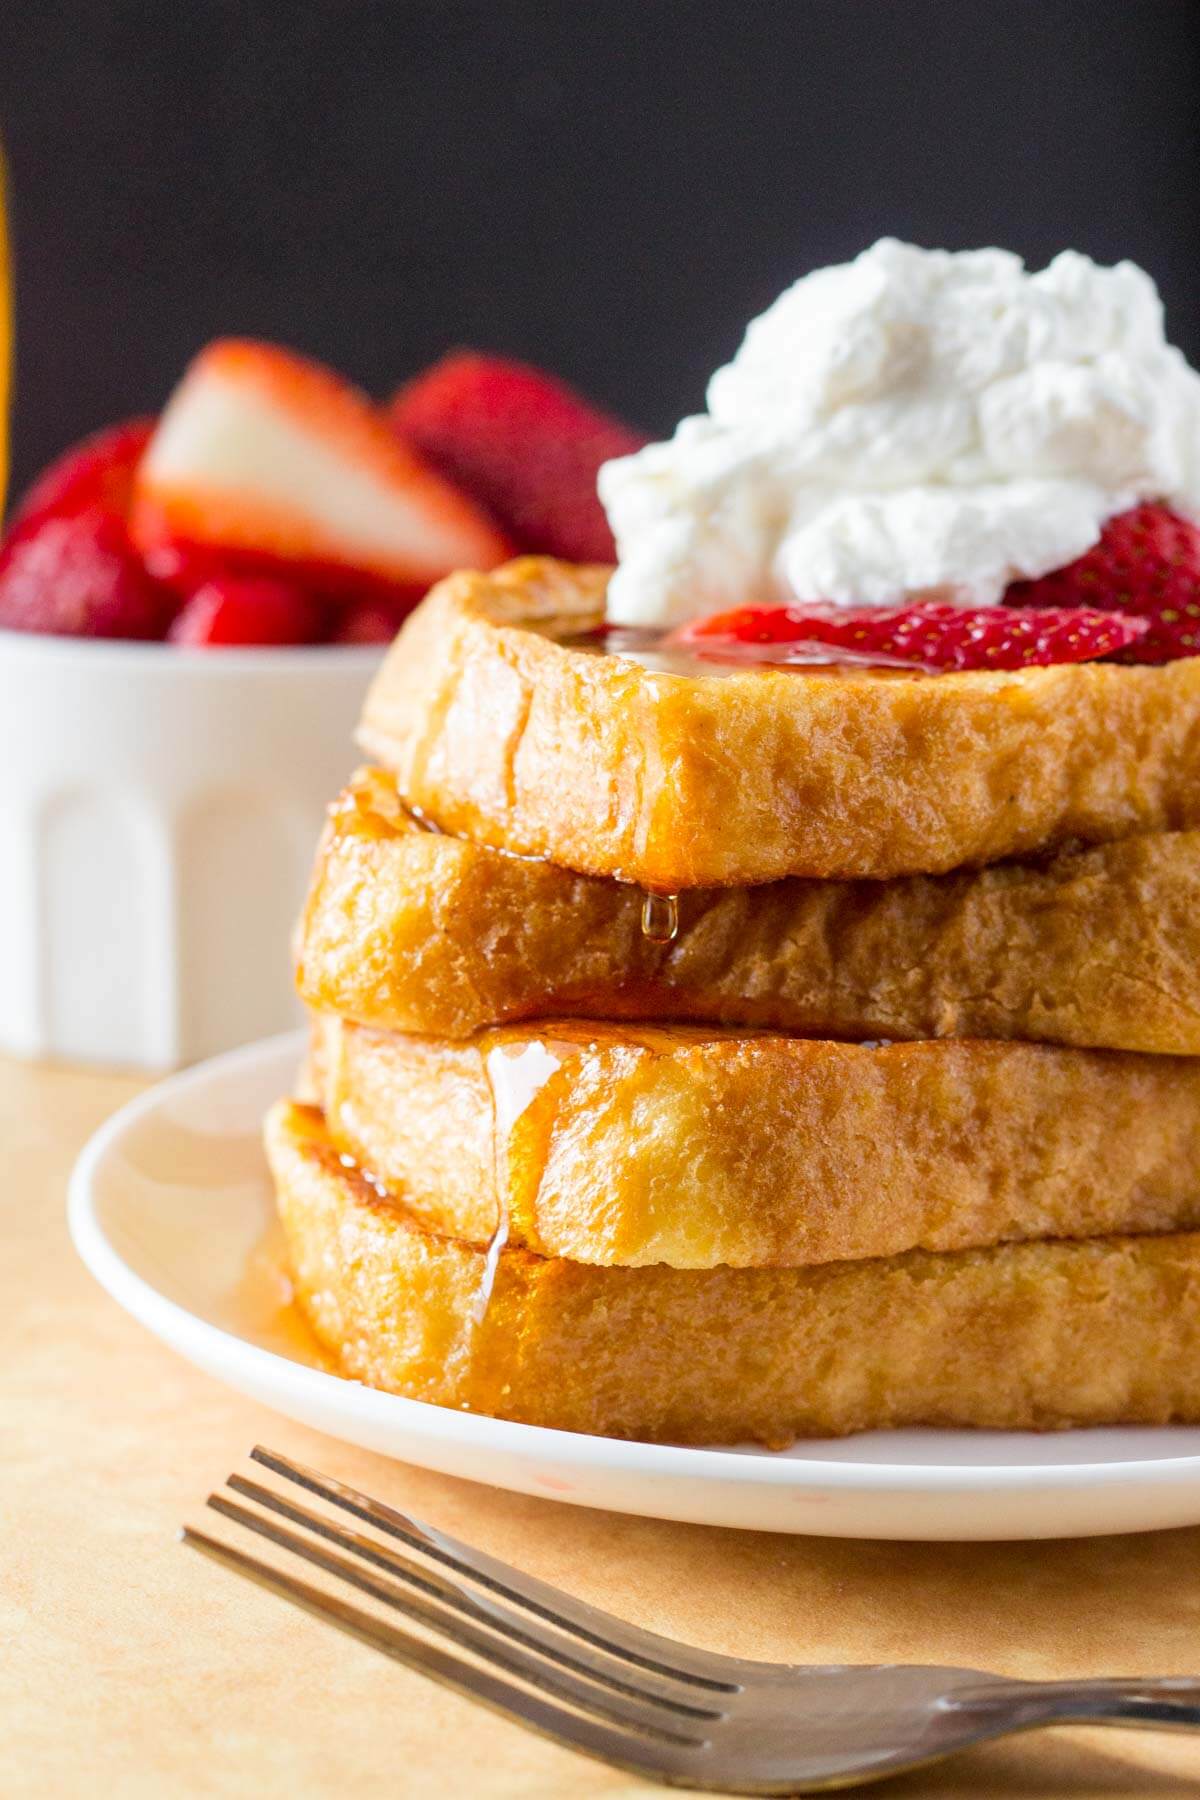 The Best French Toast. Fluffy and buttery with perfectly golden edges and a hint of cinnamon. The PERFECT comfort food. www.justsotasty.com